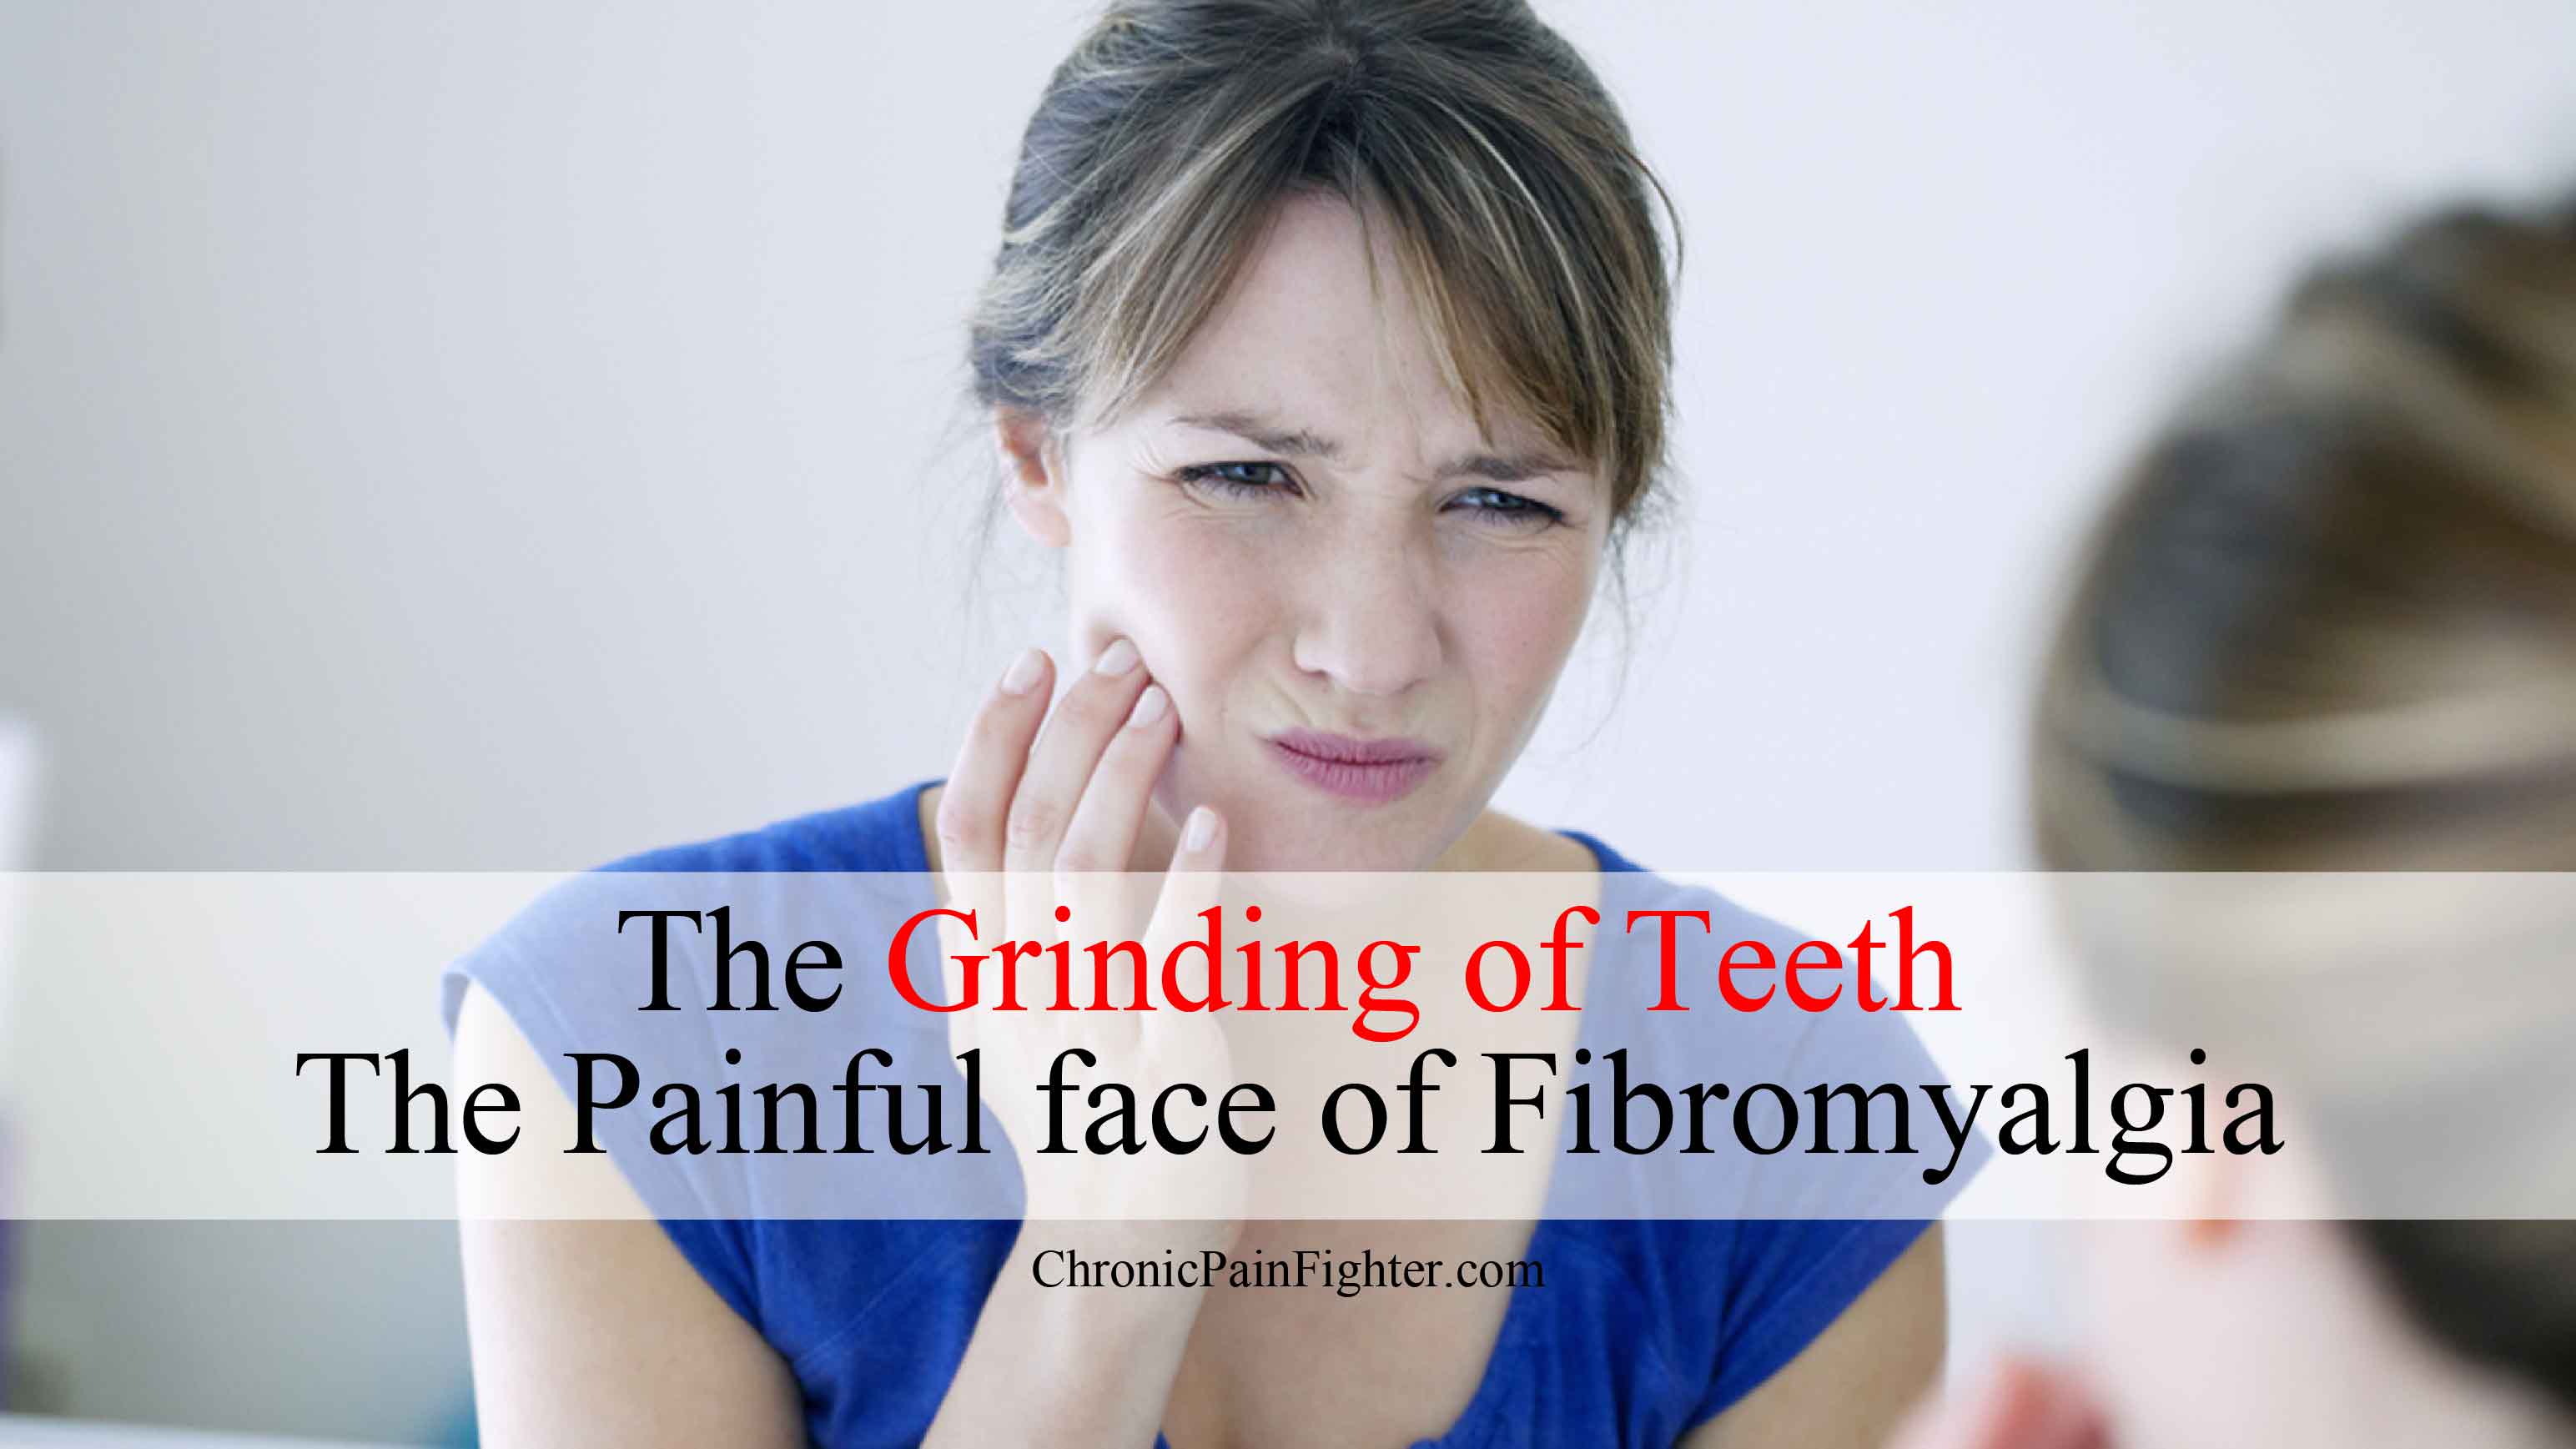 The Grinding of Teeth, The Painful face of Fibromyalgia